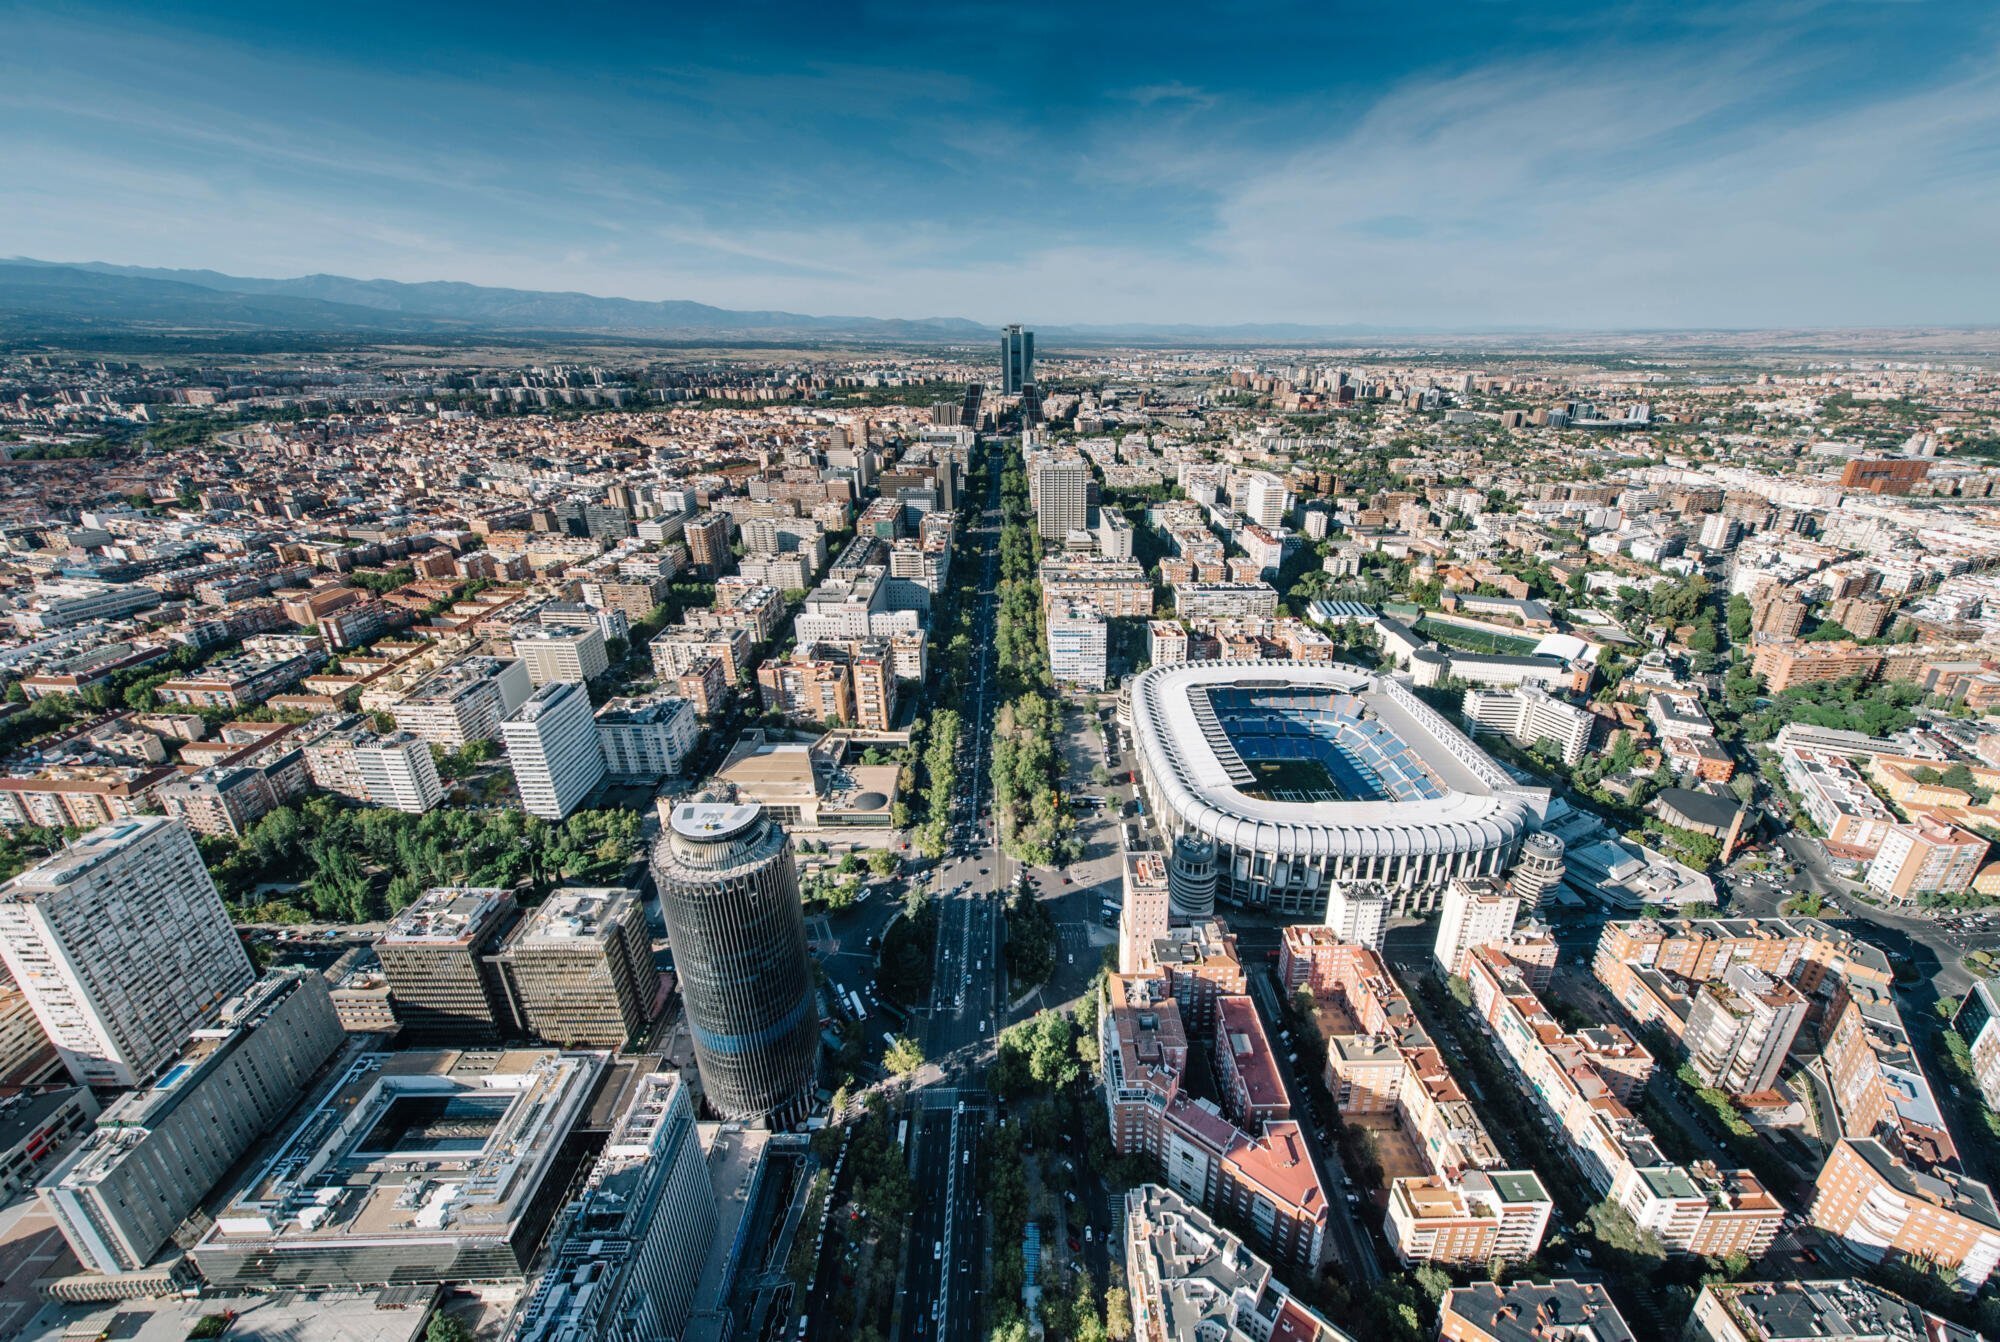 Madrid meets European air quality standards for first time in history